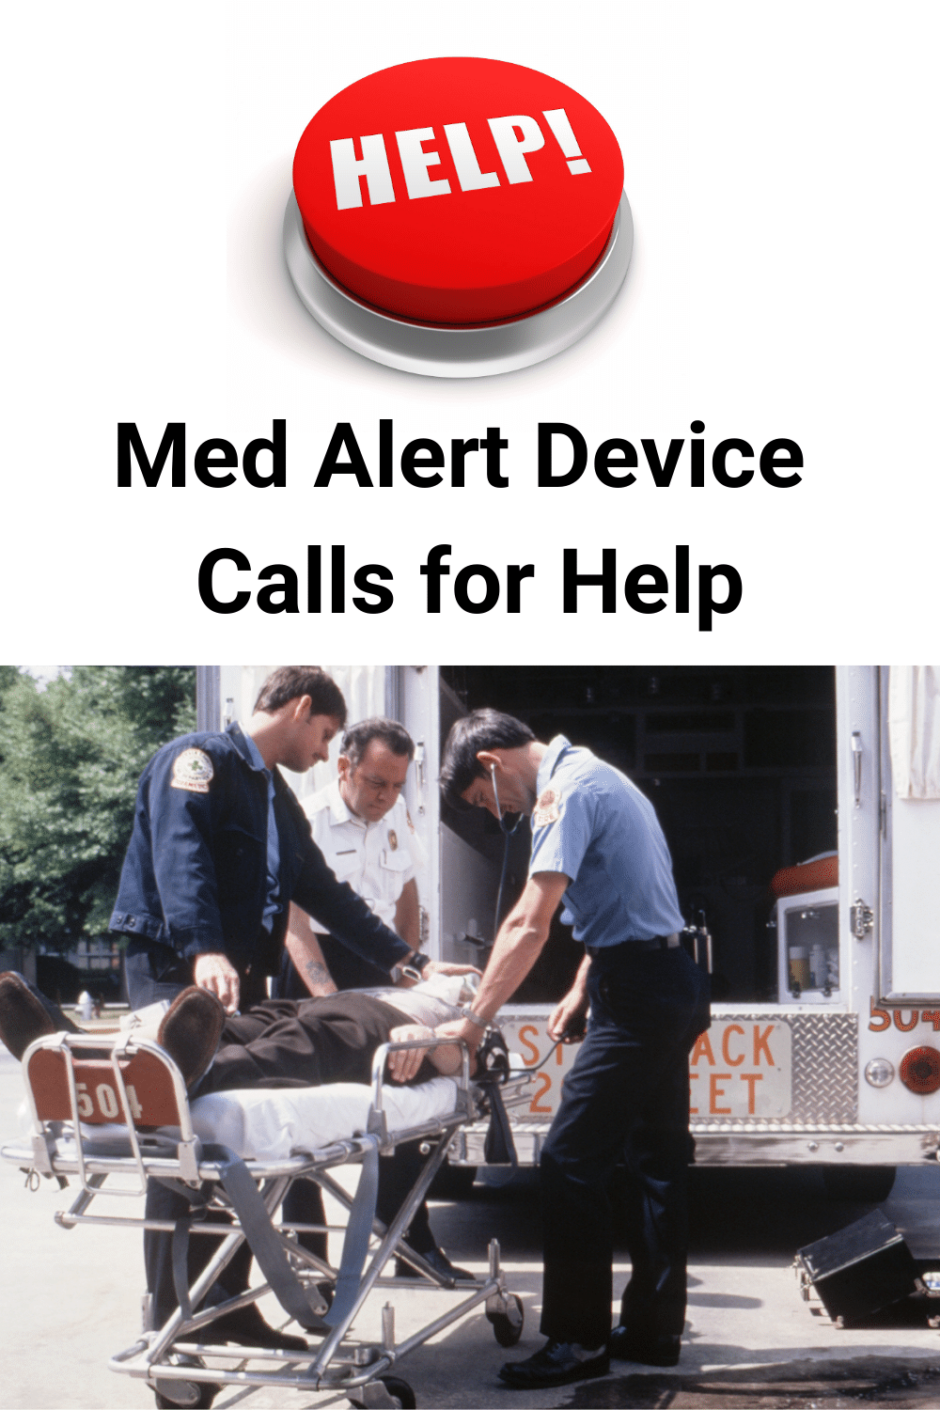 Med Alert Device - Call for Help